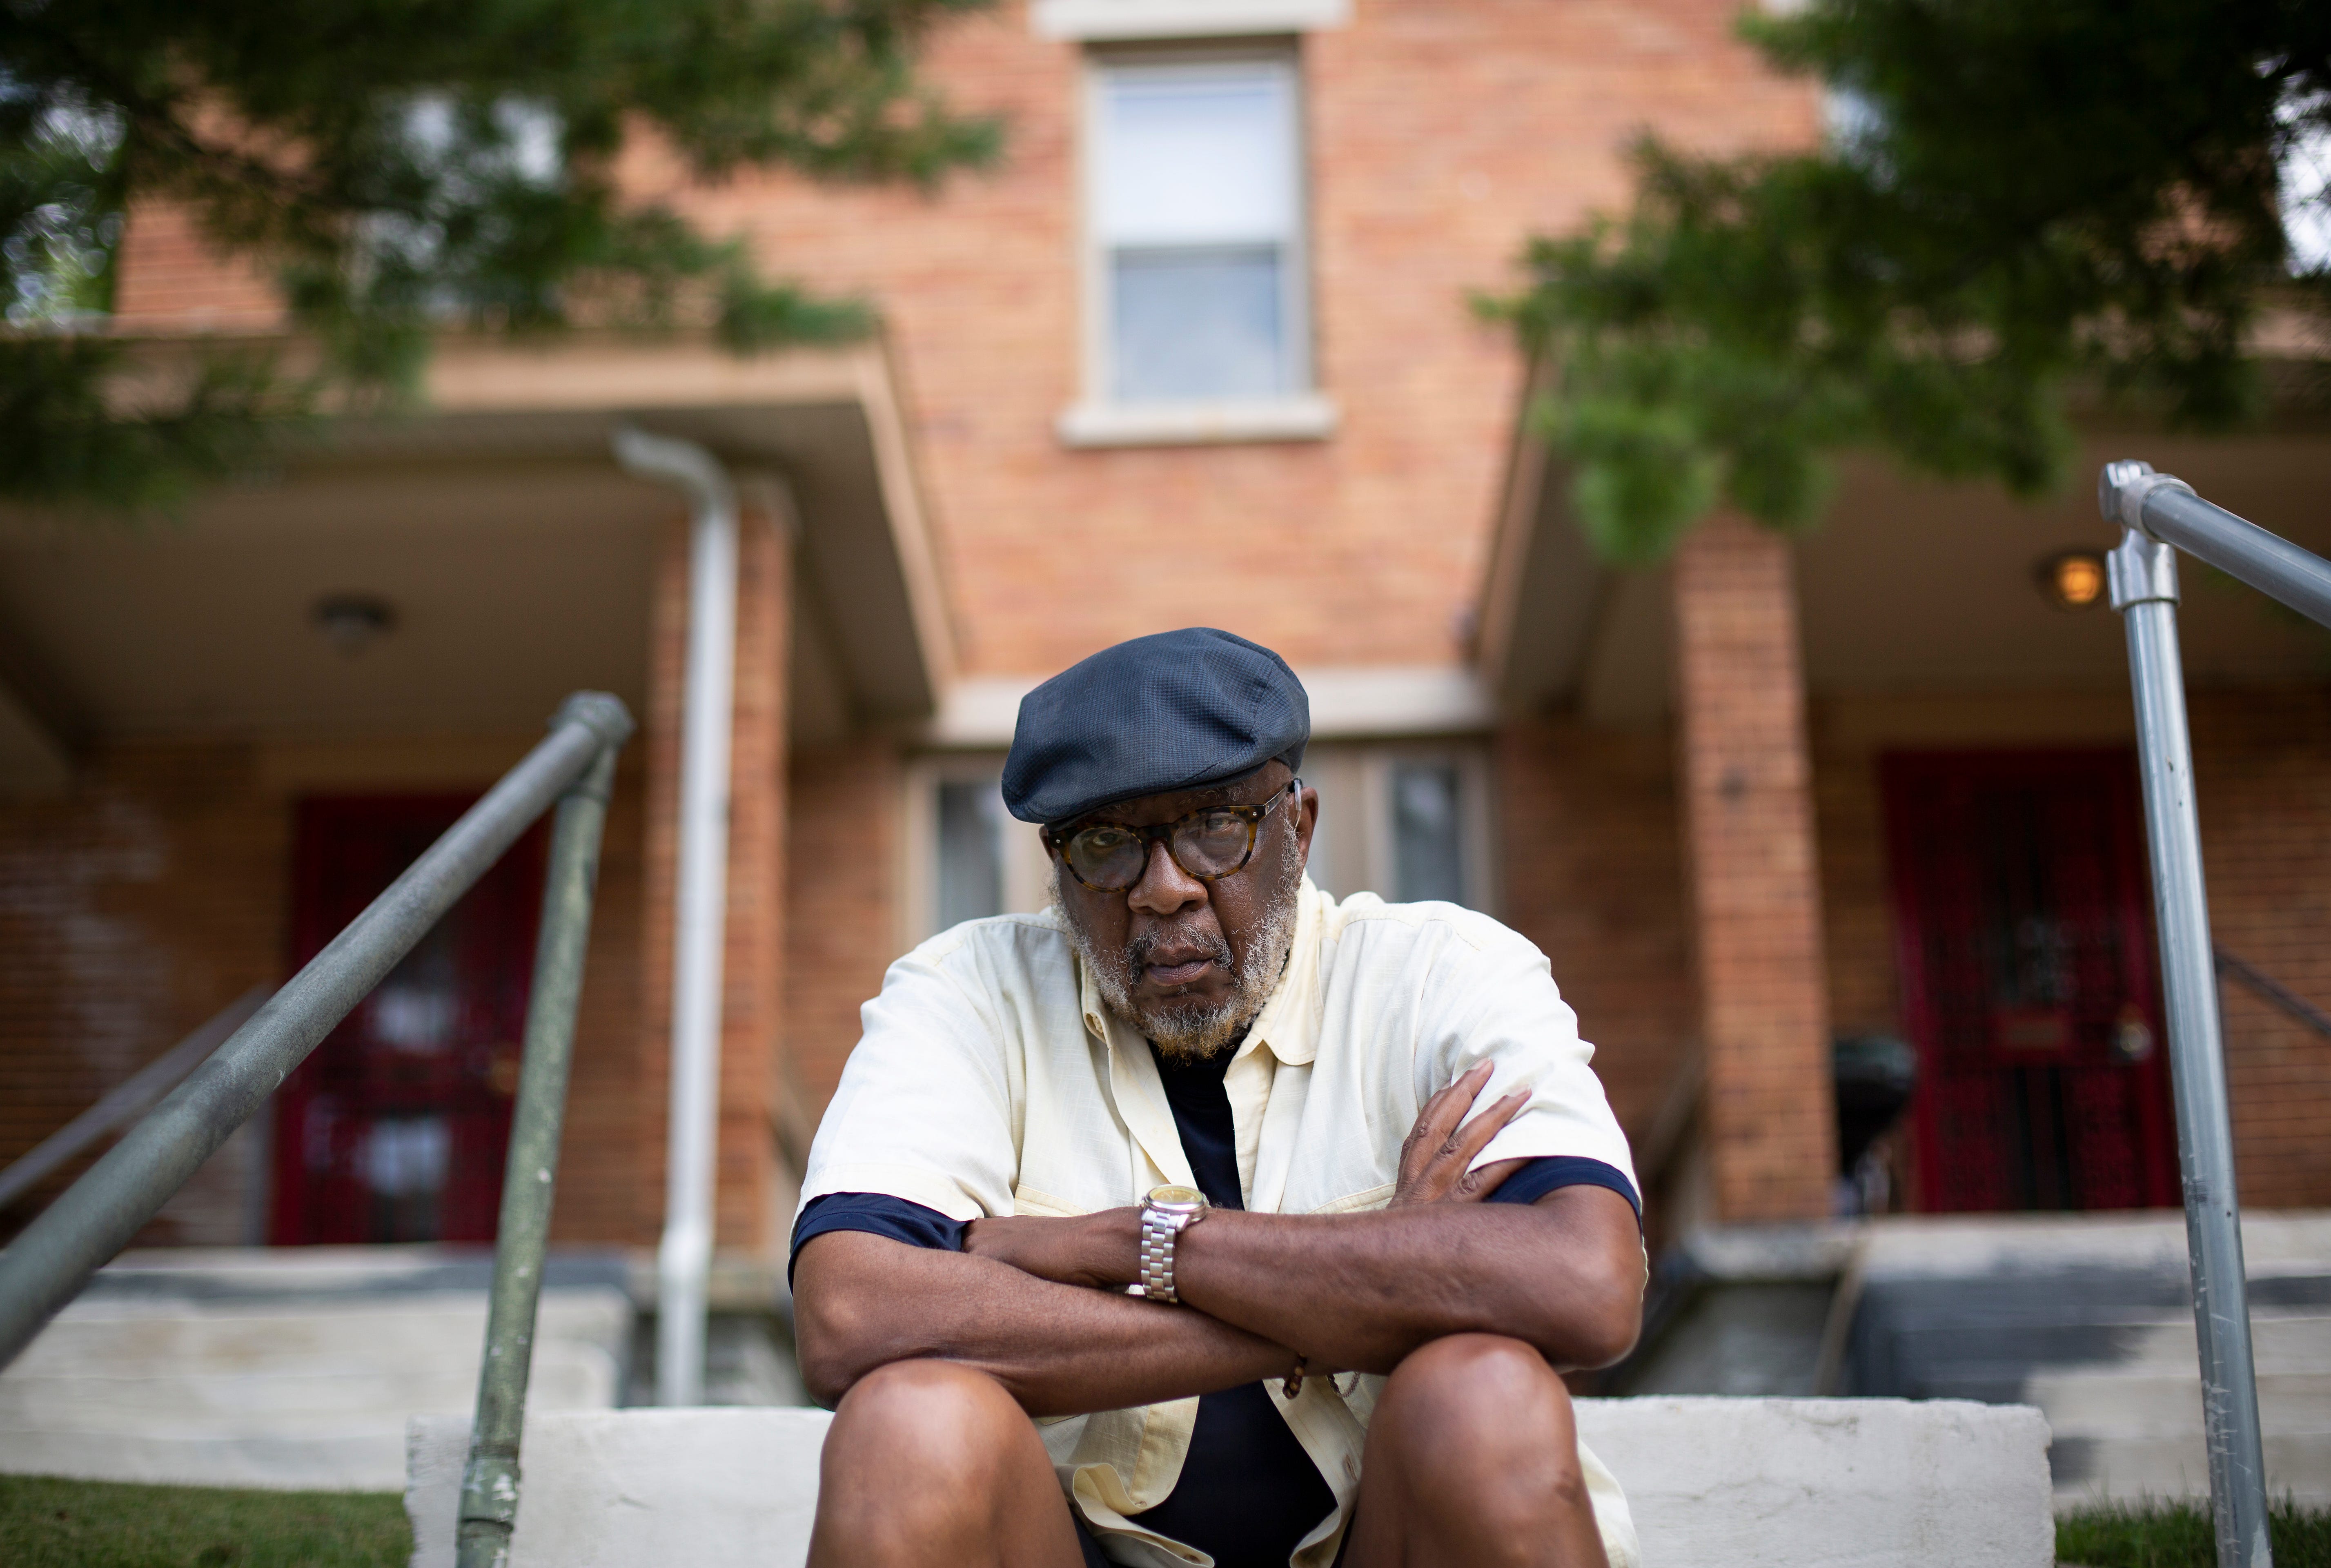 Jerome Madigan, 72, lived in the house behind him on Larona Avenue in Avondale for 68 years. He sold it in 2015 after corporate expansion consumed many of his neighbors' homes.